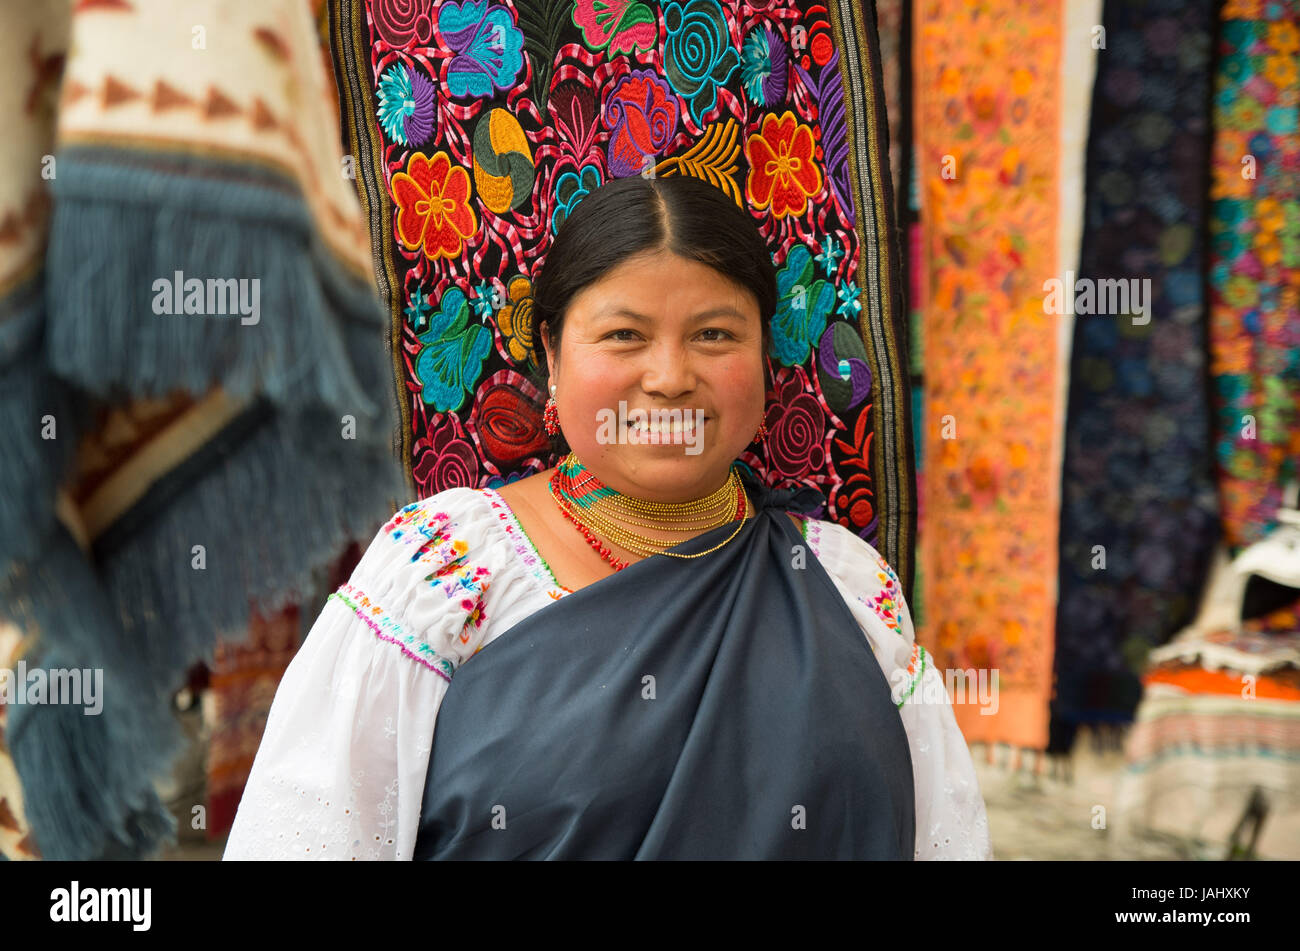 OTAVALO, ECUADOR - MAY 17, 2017: Close up of an unidentified hispanic indigenous woman wearing andean traditional clothing and necklace, posing for camera in colorful fabrics background Stock Photo